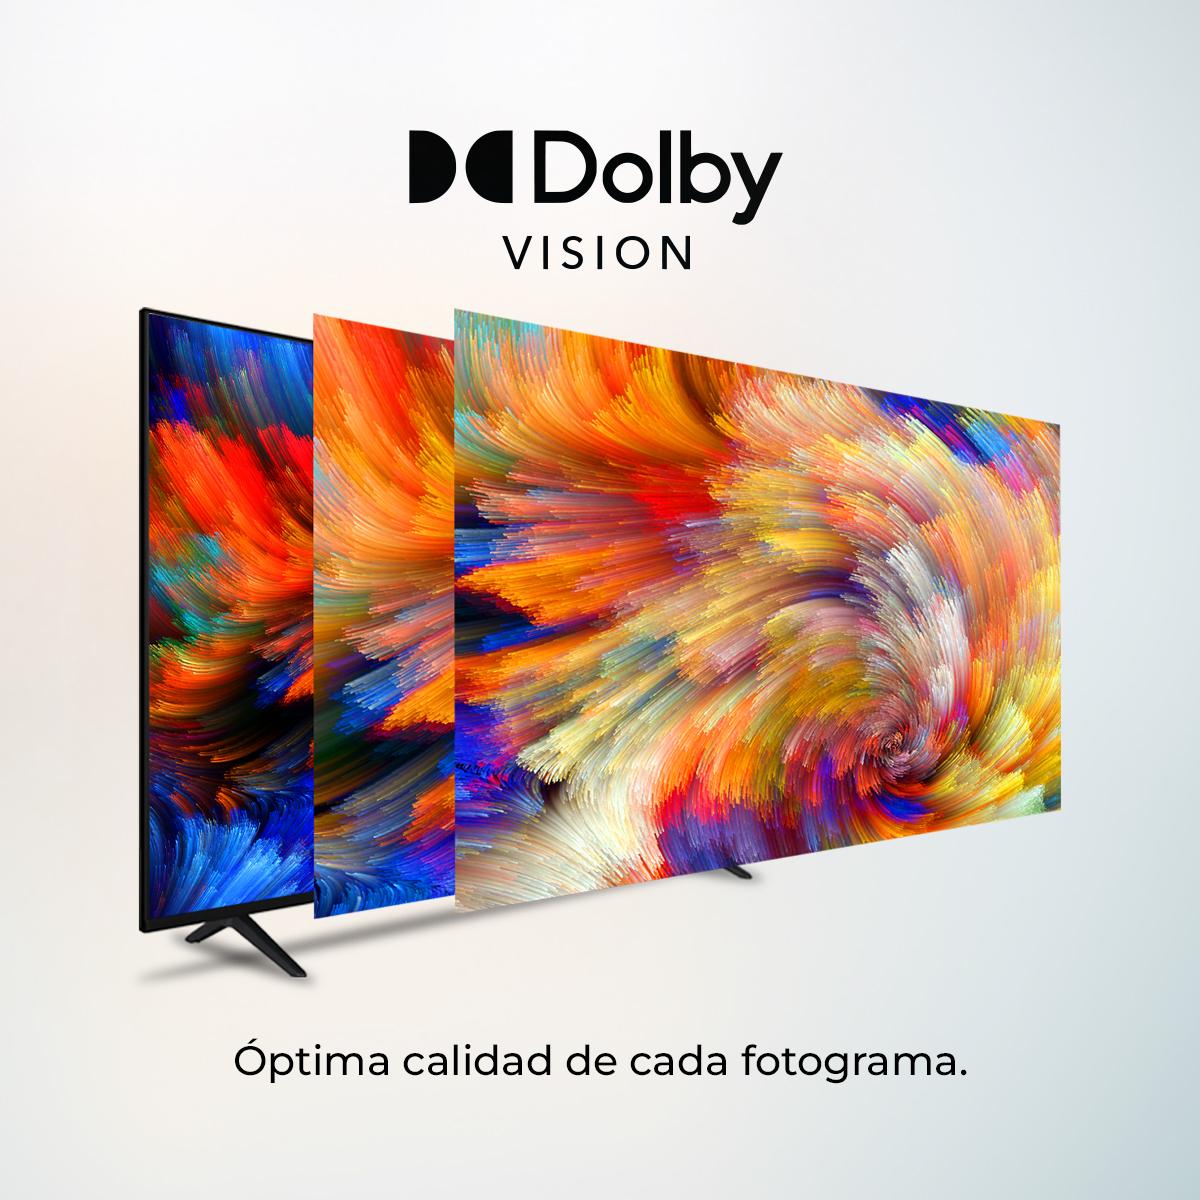 Cecotec Televisor QLED 43 Smart TV V2 Series VQU20043. 4K UHD, Android 11,  Diseño sin Marco, MEMC, Dolby Vision y Dolby Atmos, HDR10, Wide Color